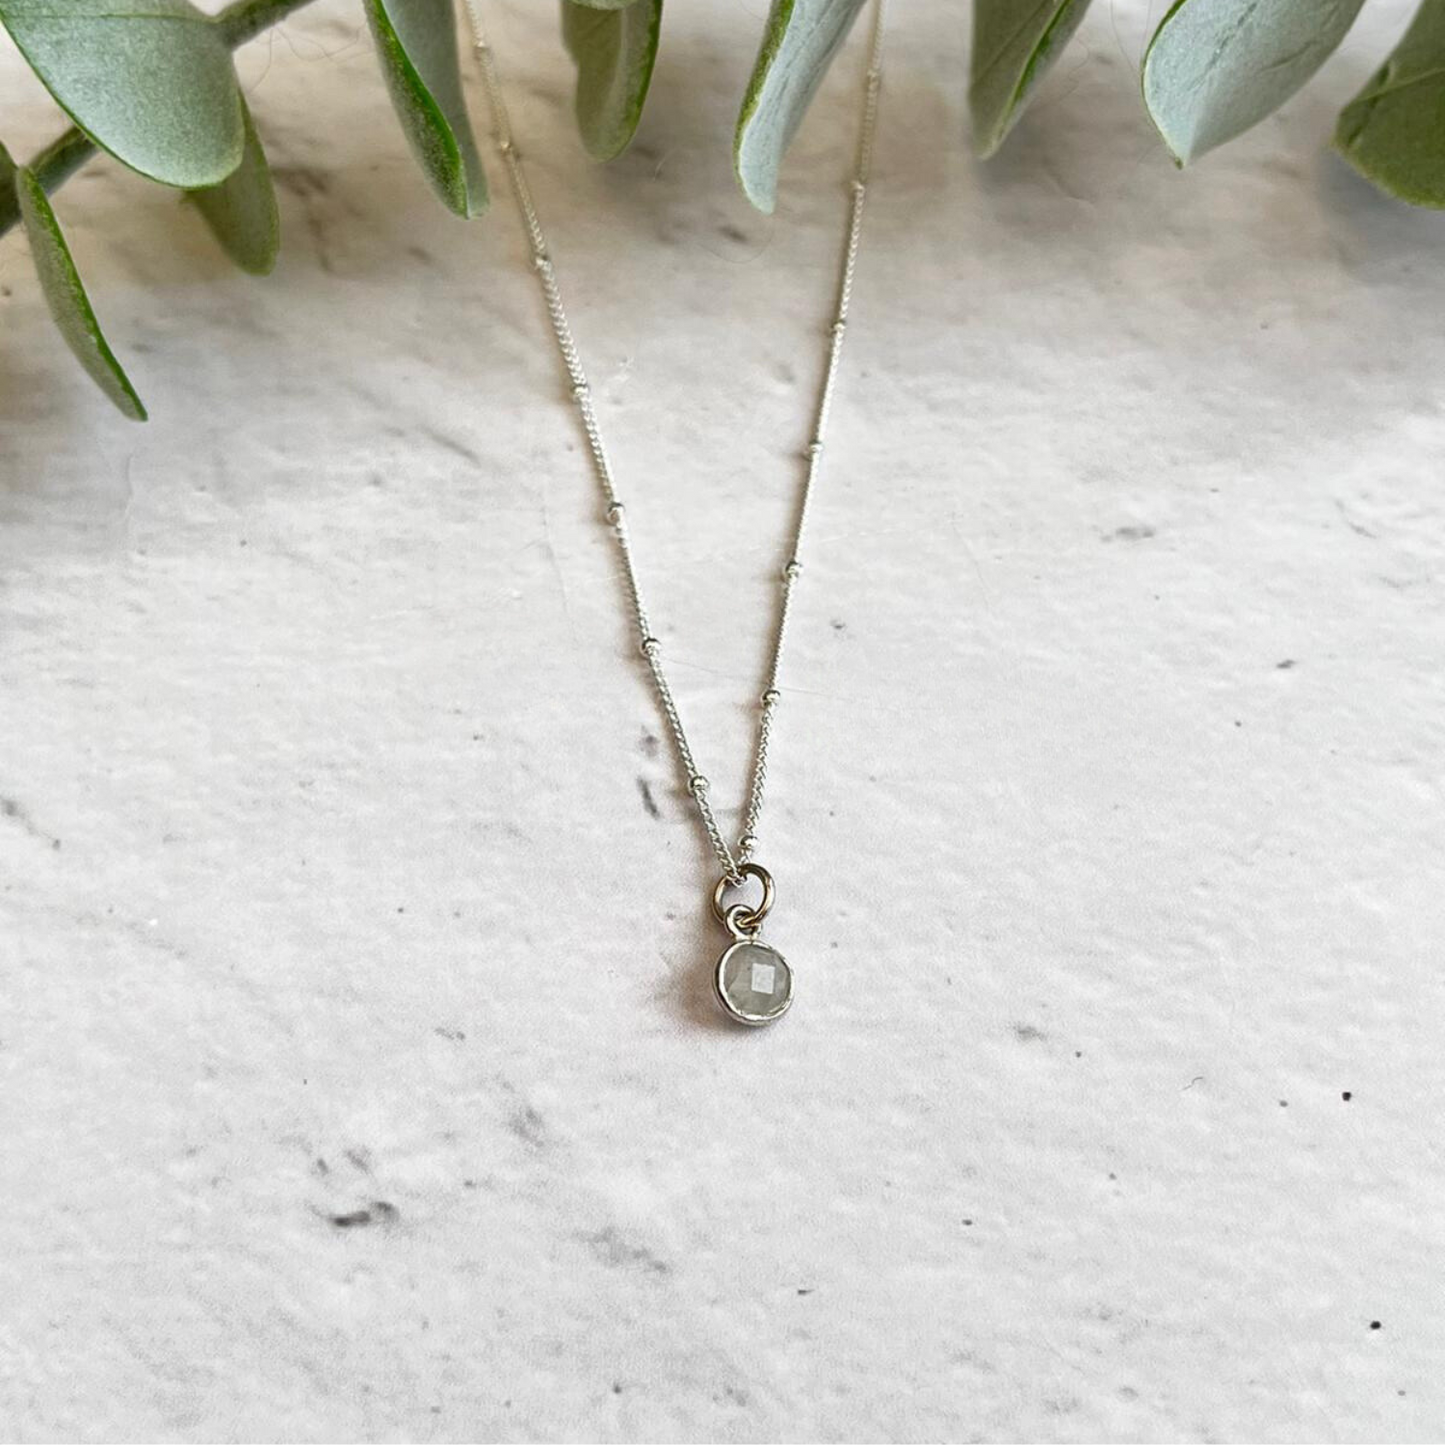 A delicate silver Birthstone Necklace for June by Made Here with Love is placed on a light-colored marble surface. The pendant appears to have a tiny moonstone charm embedded in it, perfect as a June birthday gift. Green leaves frame the top of the image, adding a natural touch.